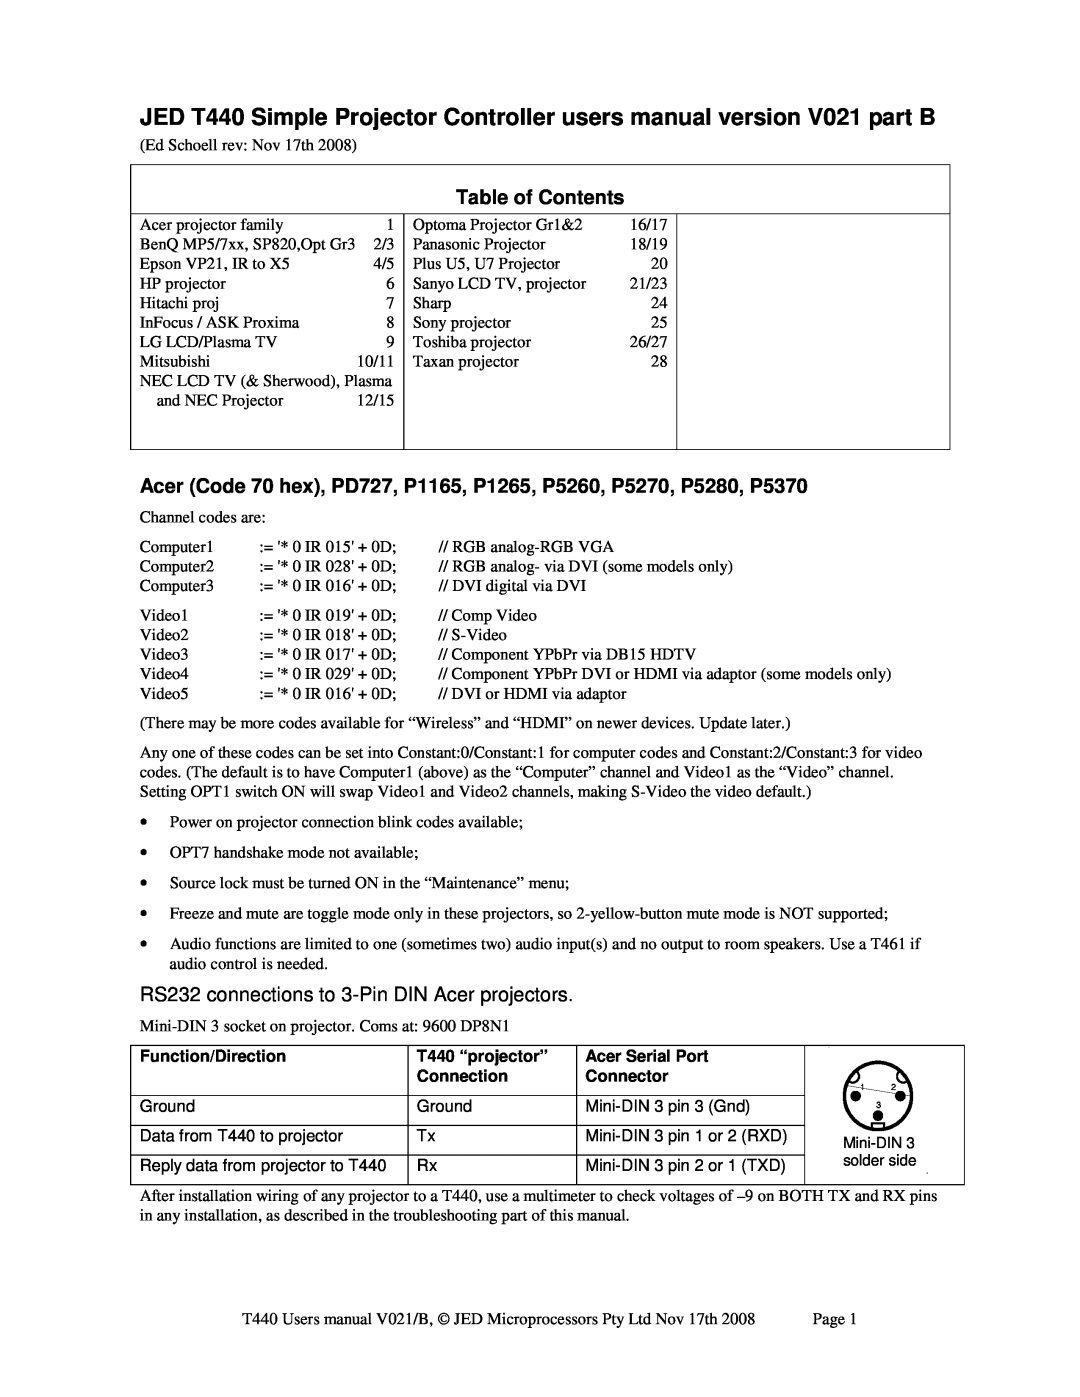 Epson JED T440 user manual Table of Contents, Acer Code 70 hex, PD727, P1165, P1265, P5260, P5270, P5280, P5370, Connector 